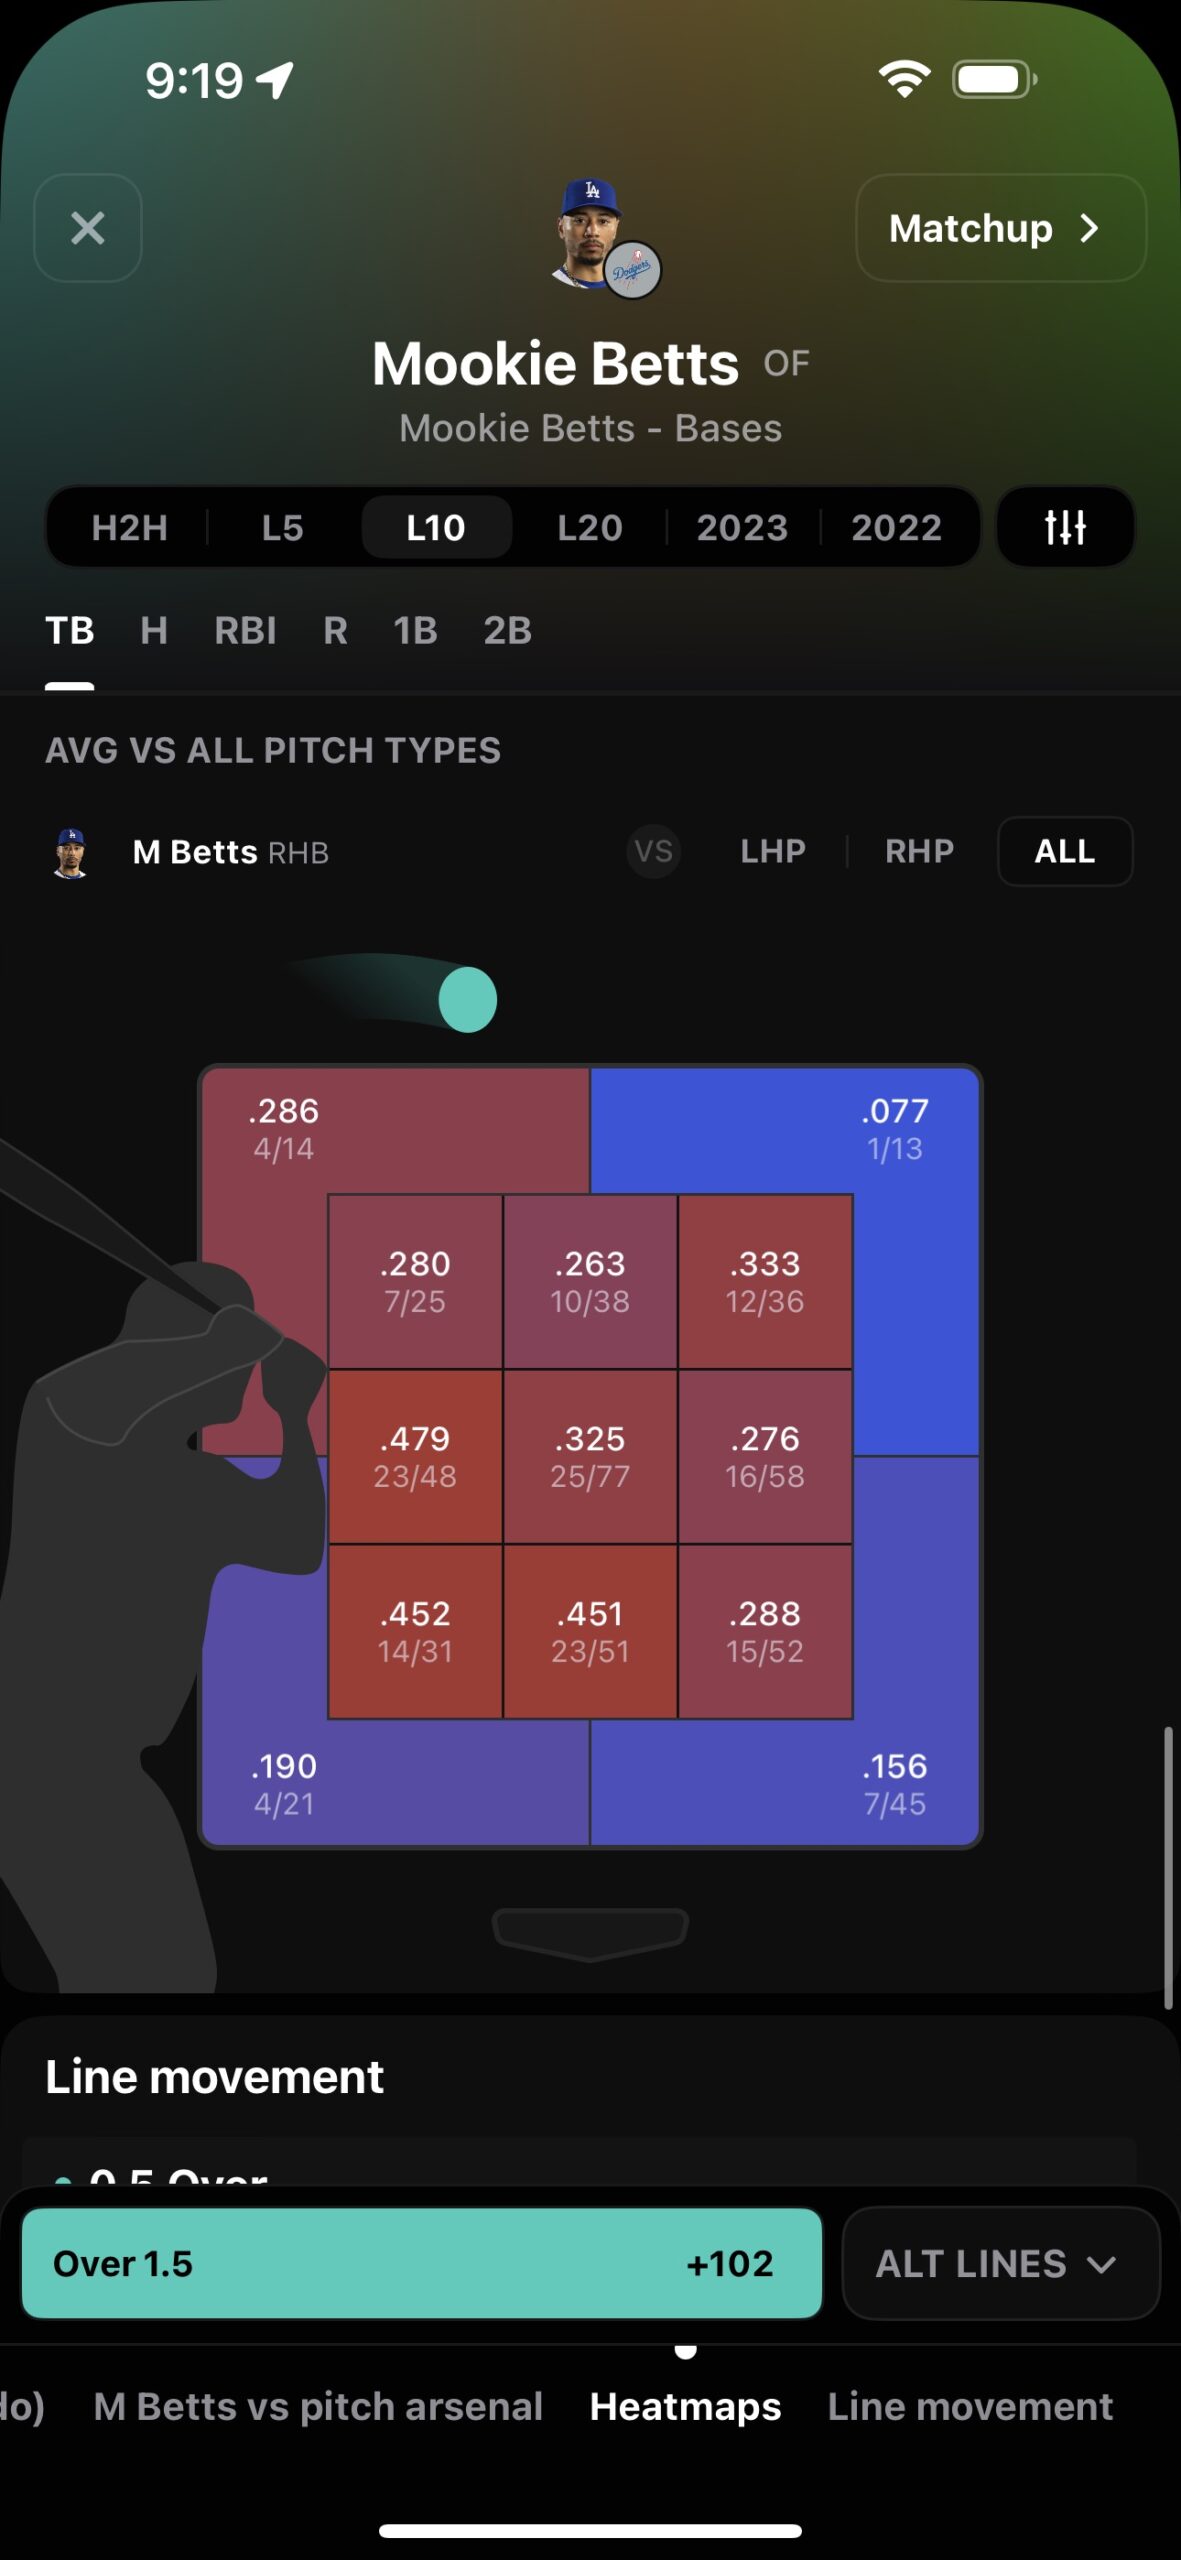 heatmap to analyze hitter and pitcher props